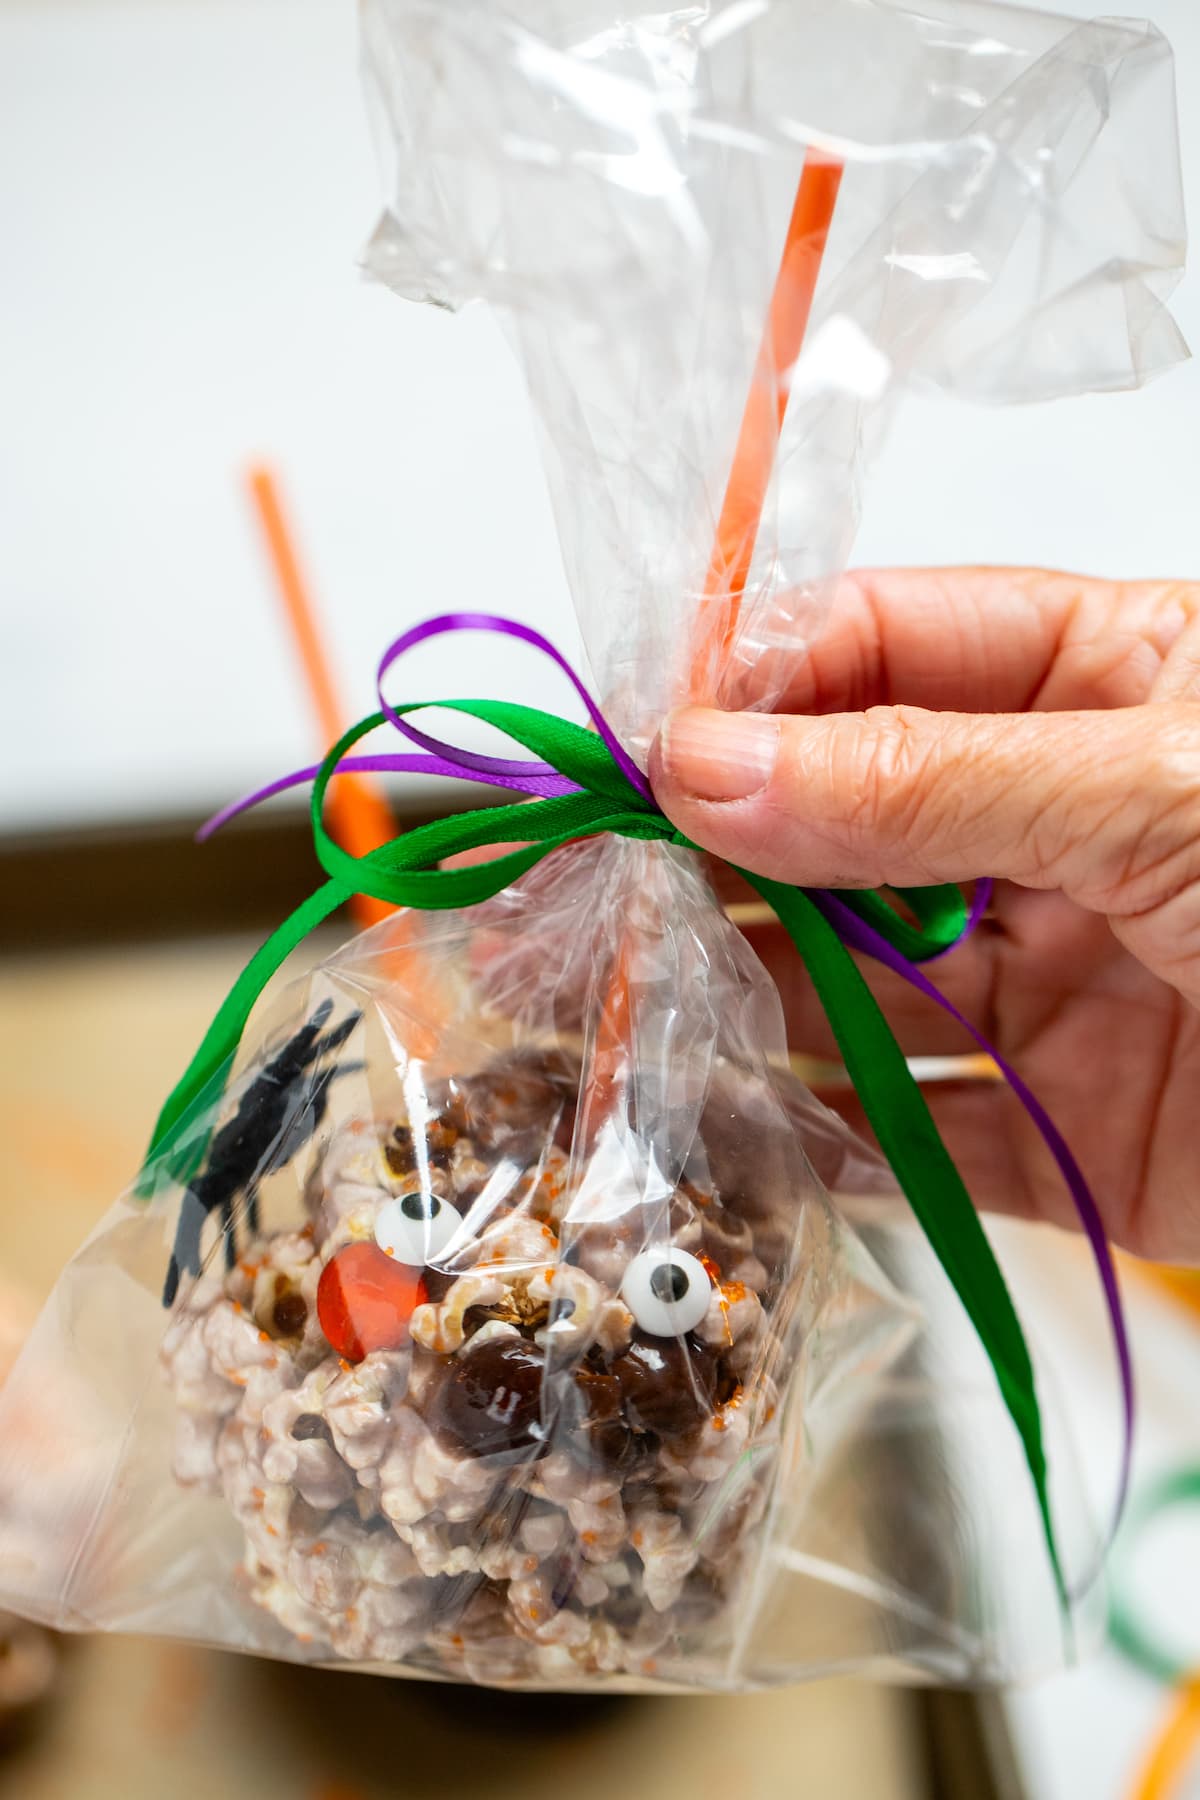 Popcorn ball for halloween with an orange stick on the top, in a plastic gift bag tied with ribbon, being help up by a hand.